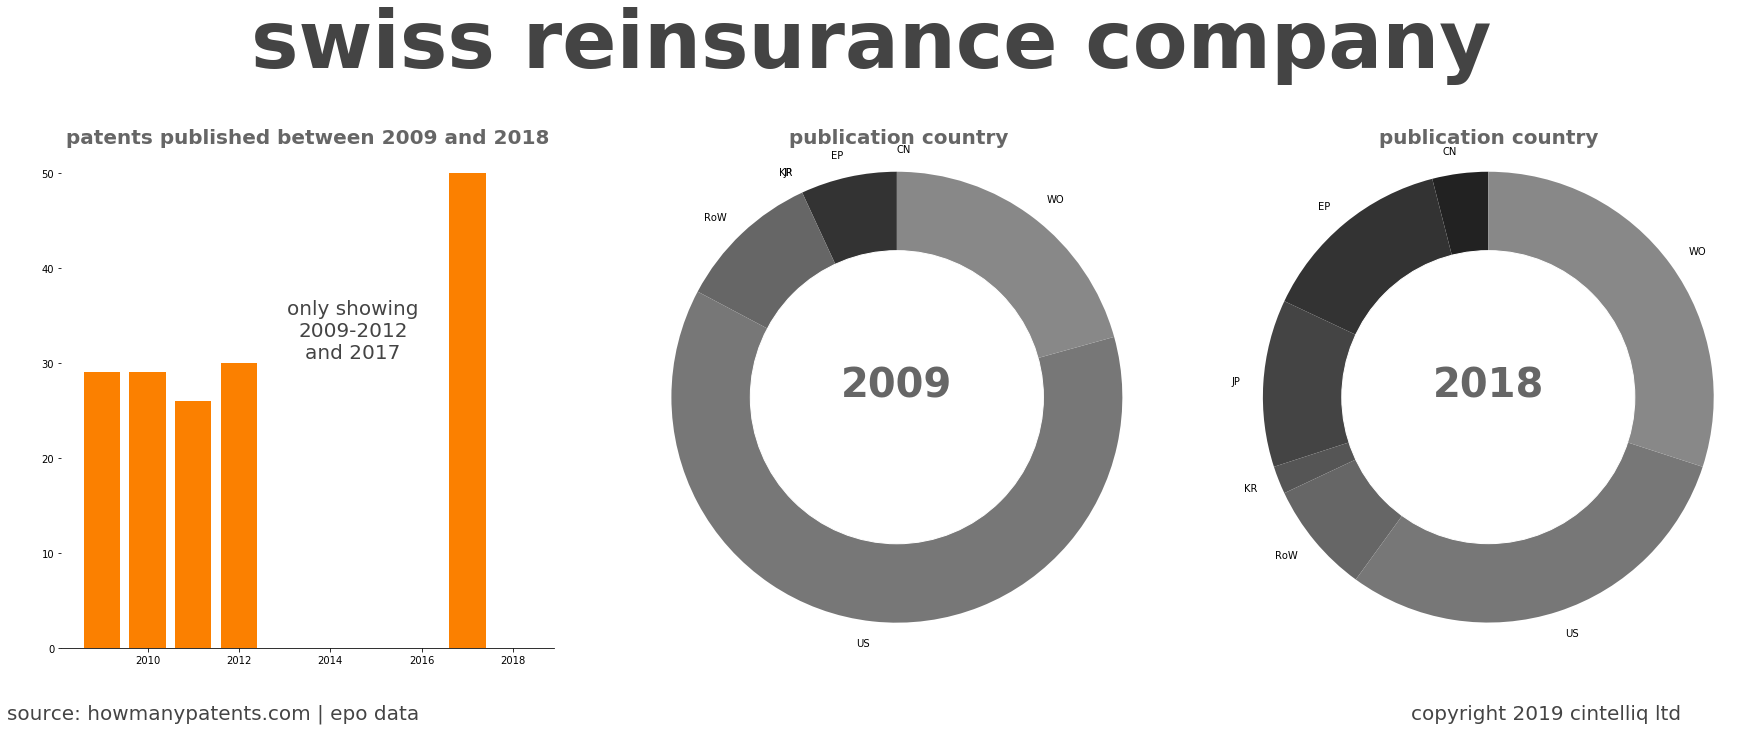 summary of patents for Swiss Reinsurance Company